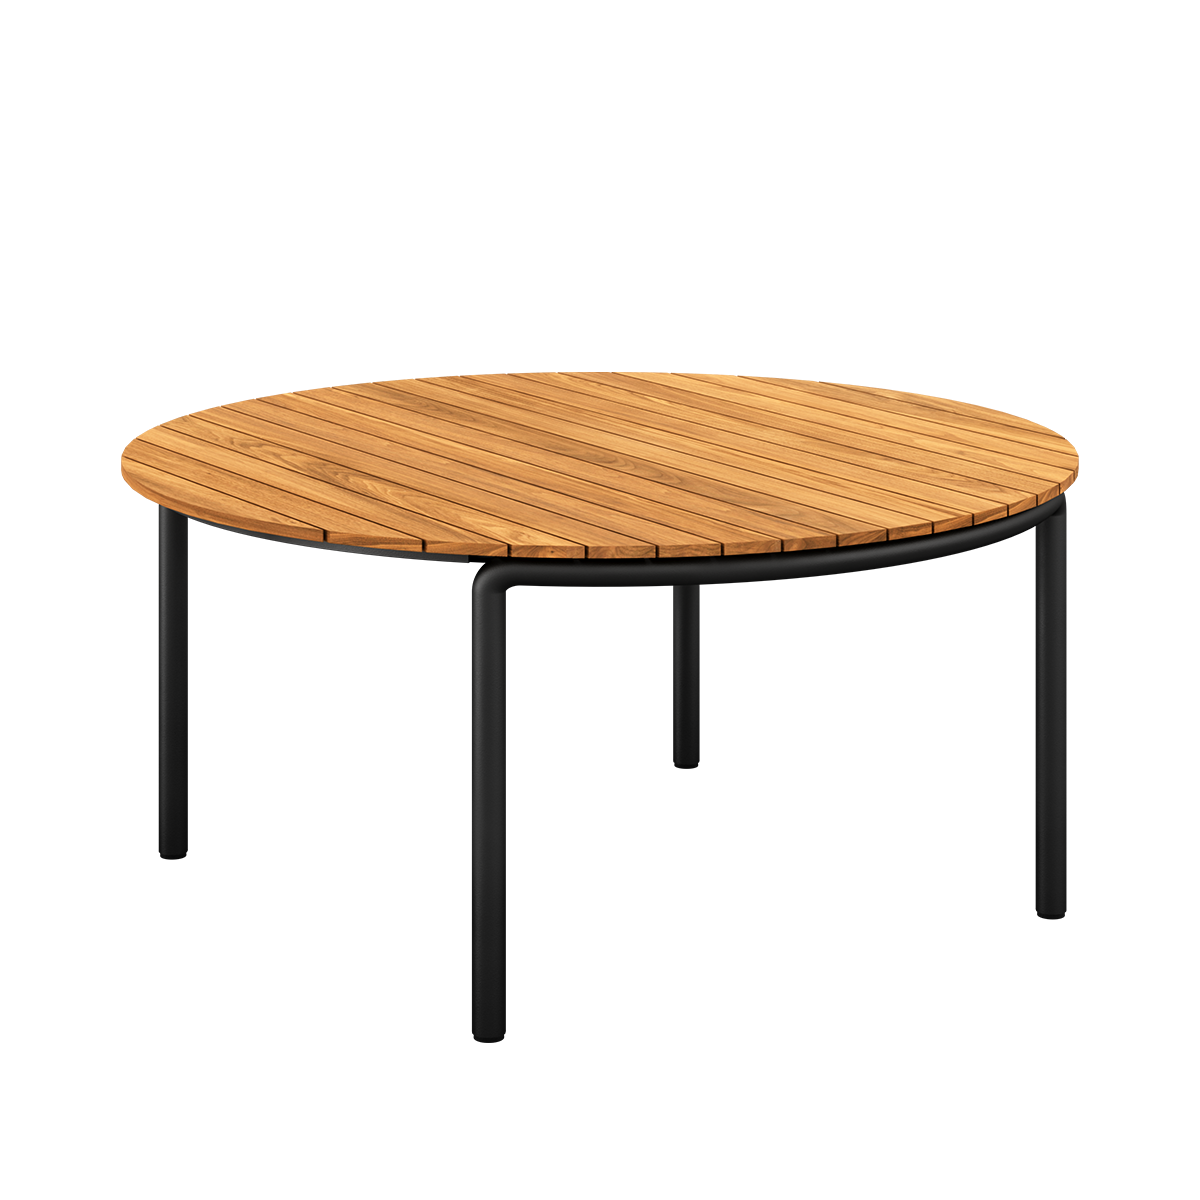 Patio Dining Table - Oe160